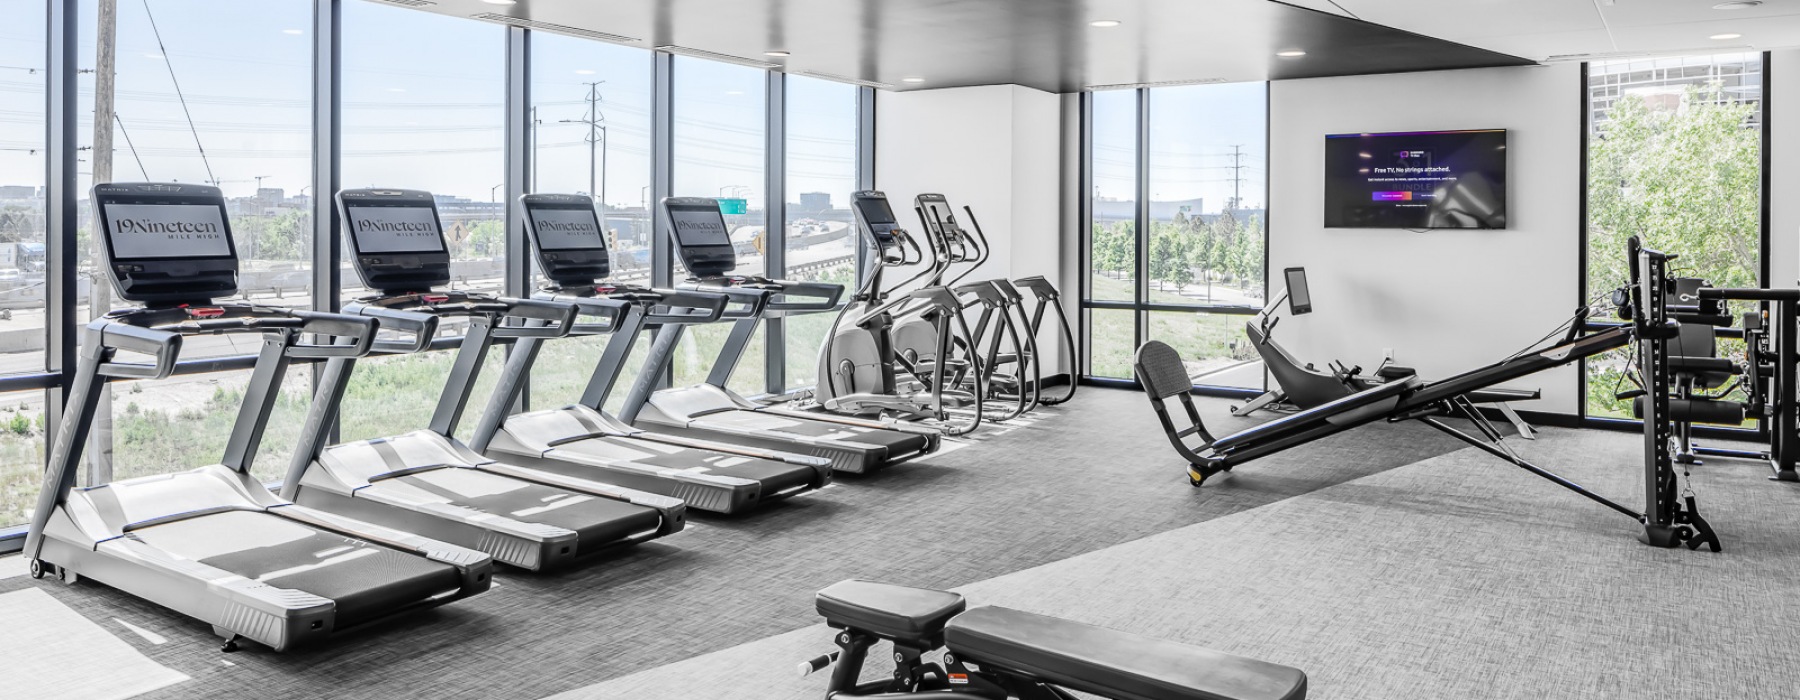 Fitness center with windows and cardio equipment